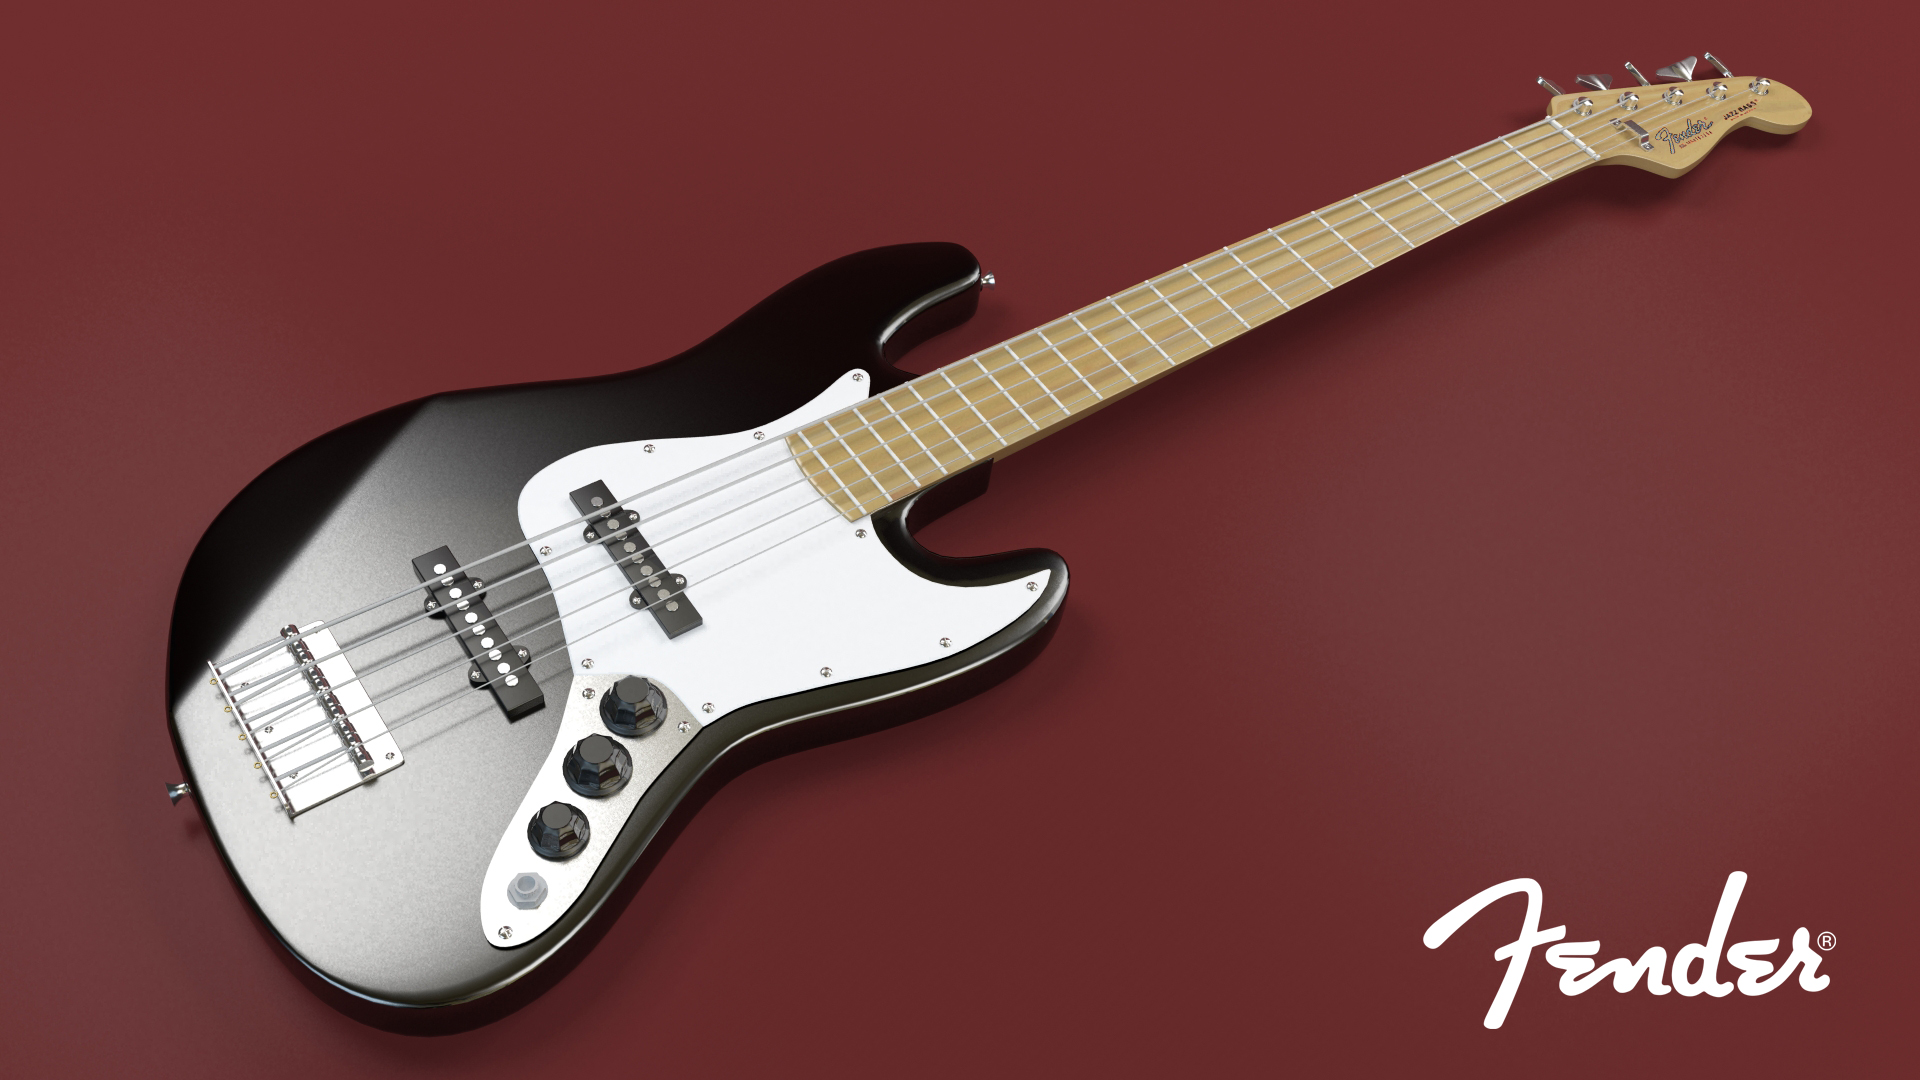  guitar wallpapers   Awesome bass guitar wallpaper   Awesome Fender